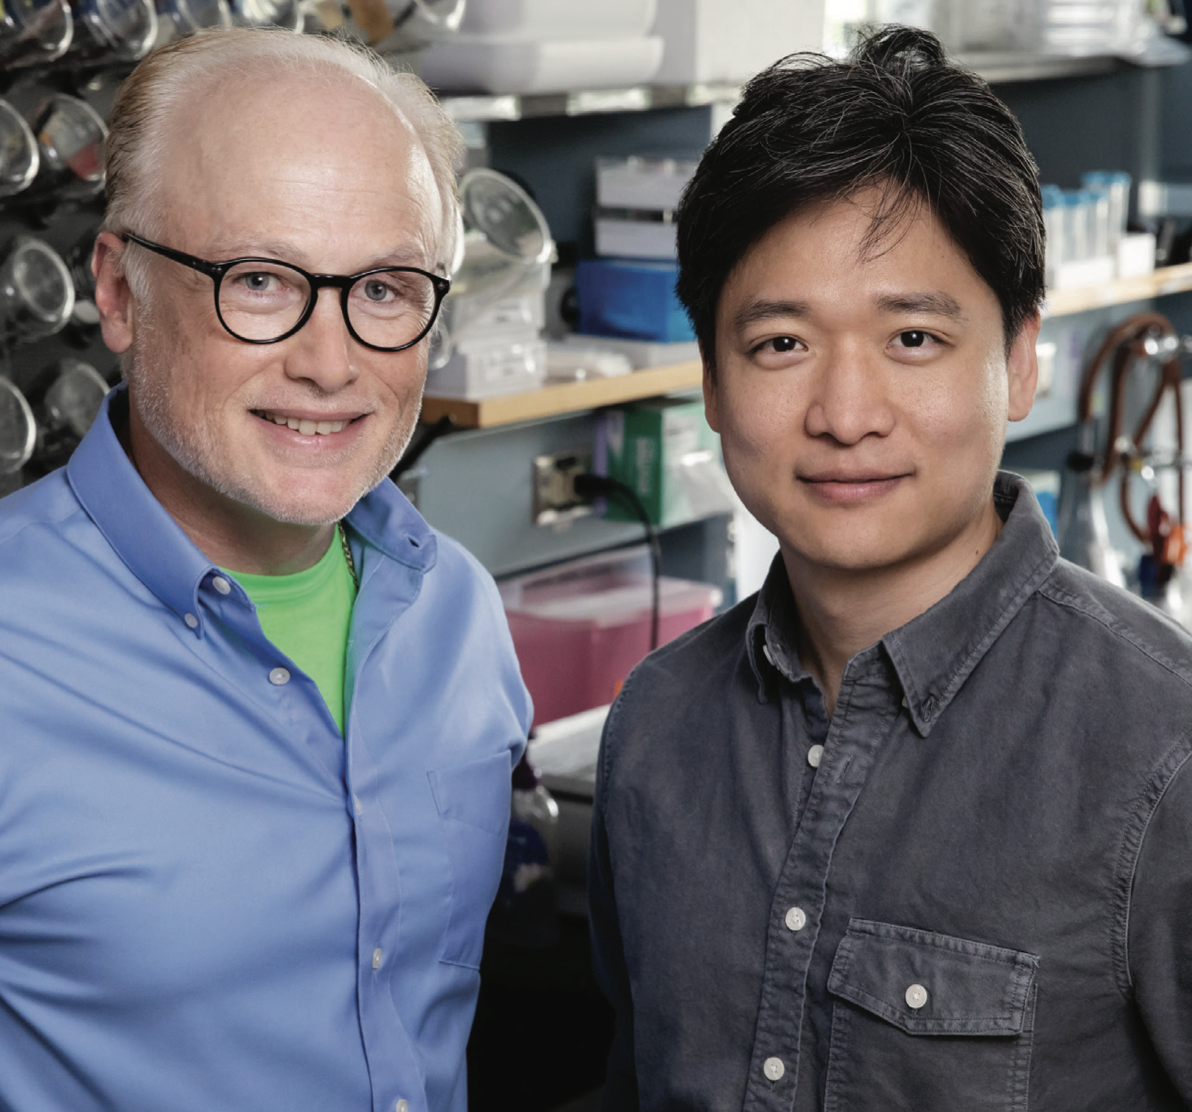 Microbiology professor Steven Blanke, graduate student Ik-Jung Kim and their colleagues discovered how a disease-causing bacterium, Helicobacter pylori, undermines the body’s immune defenses. Photo by L. Brian Stauffer.